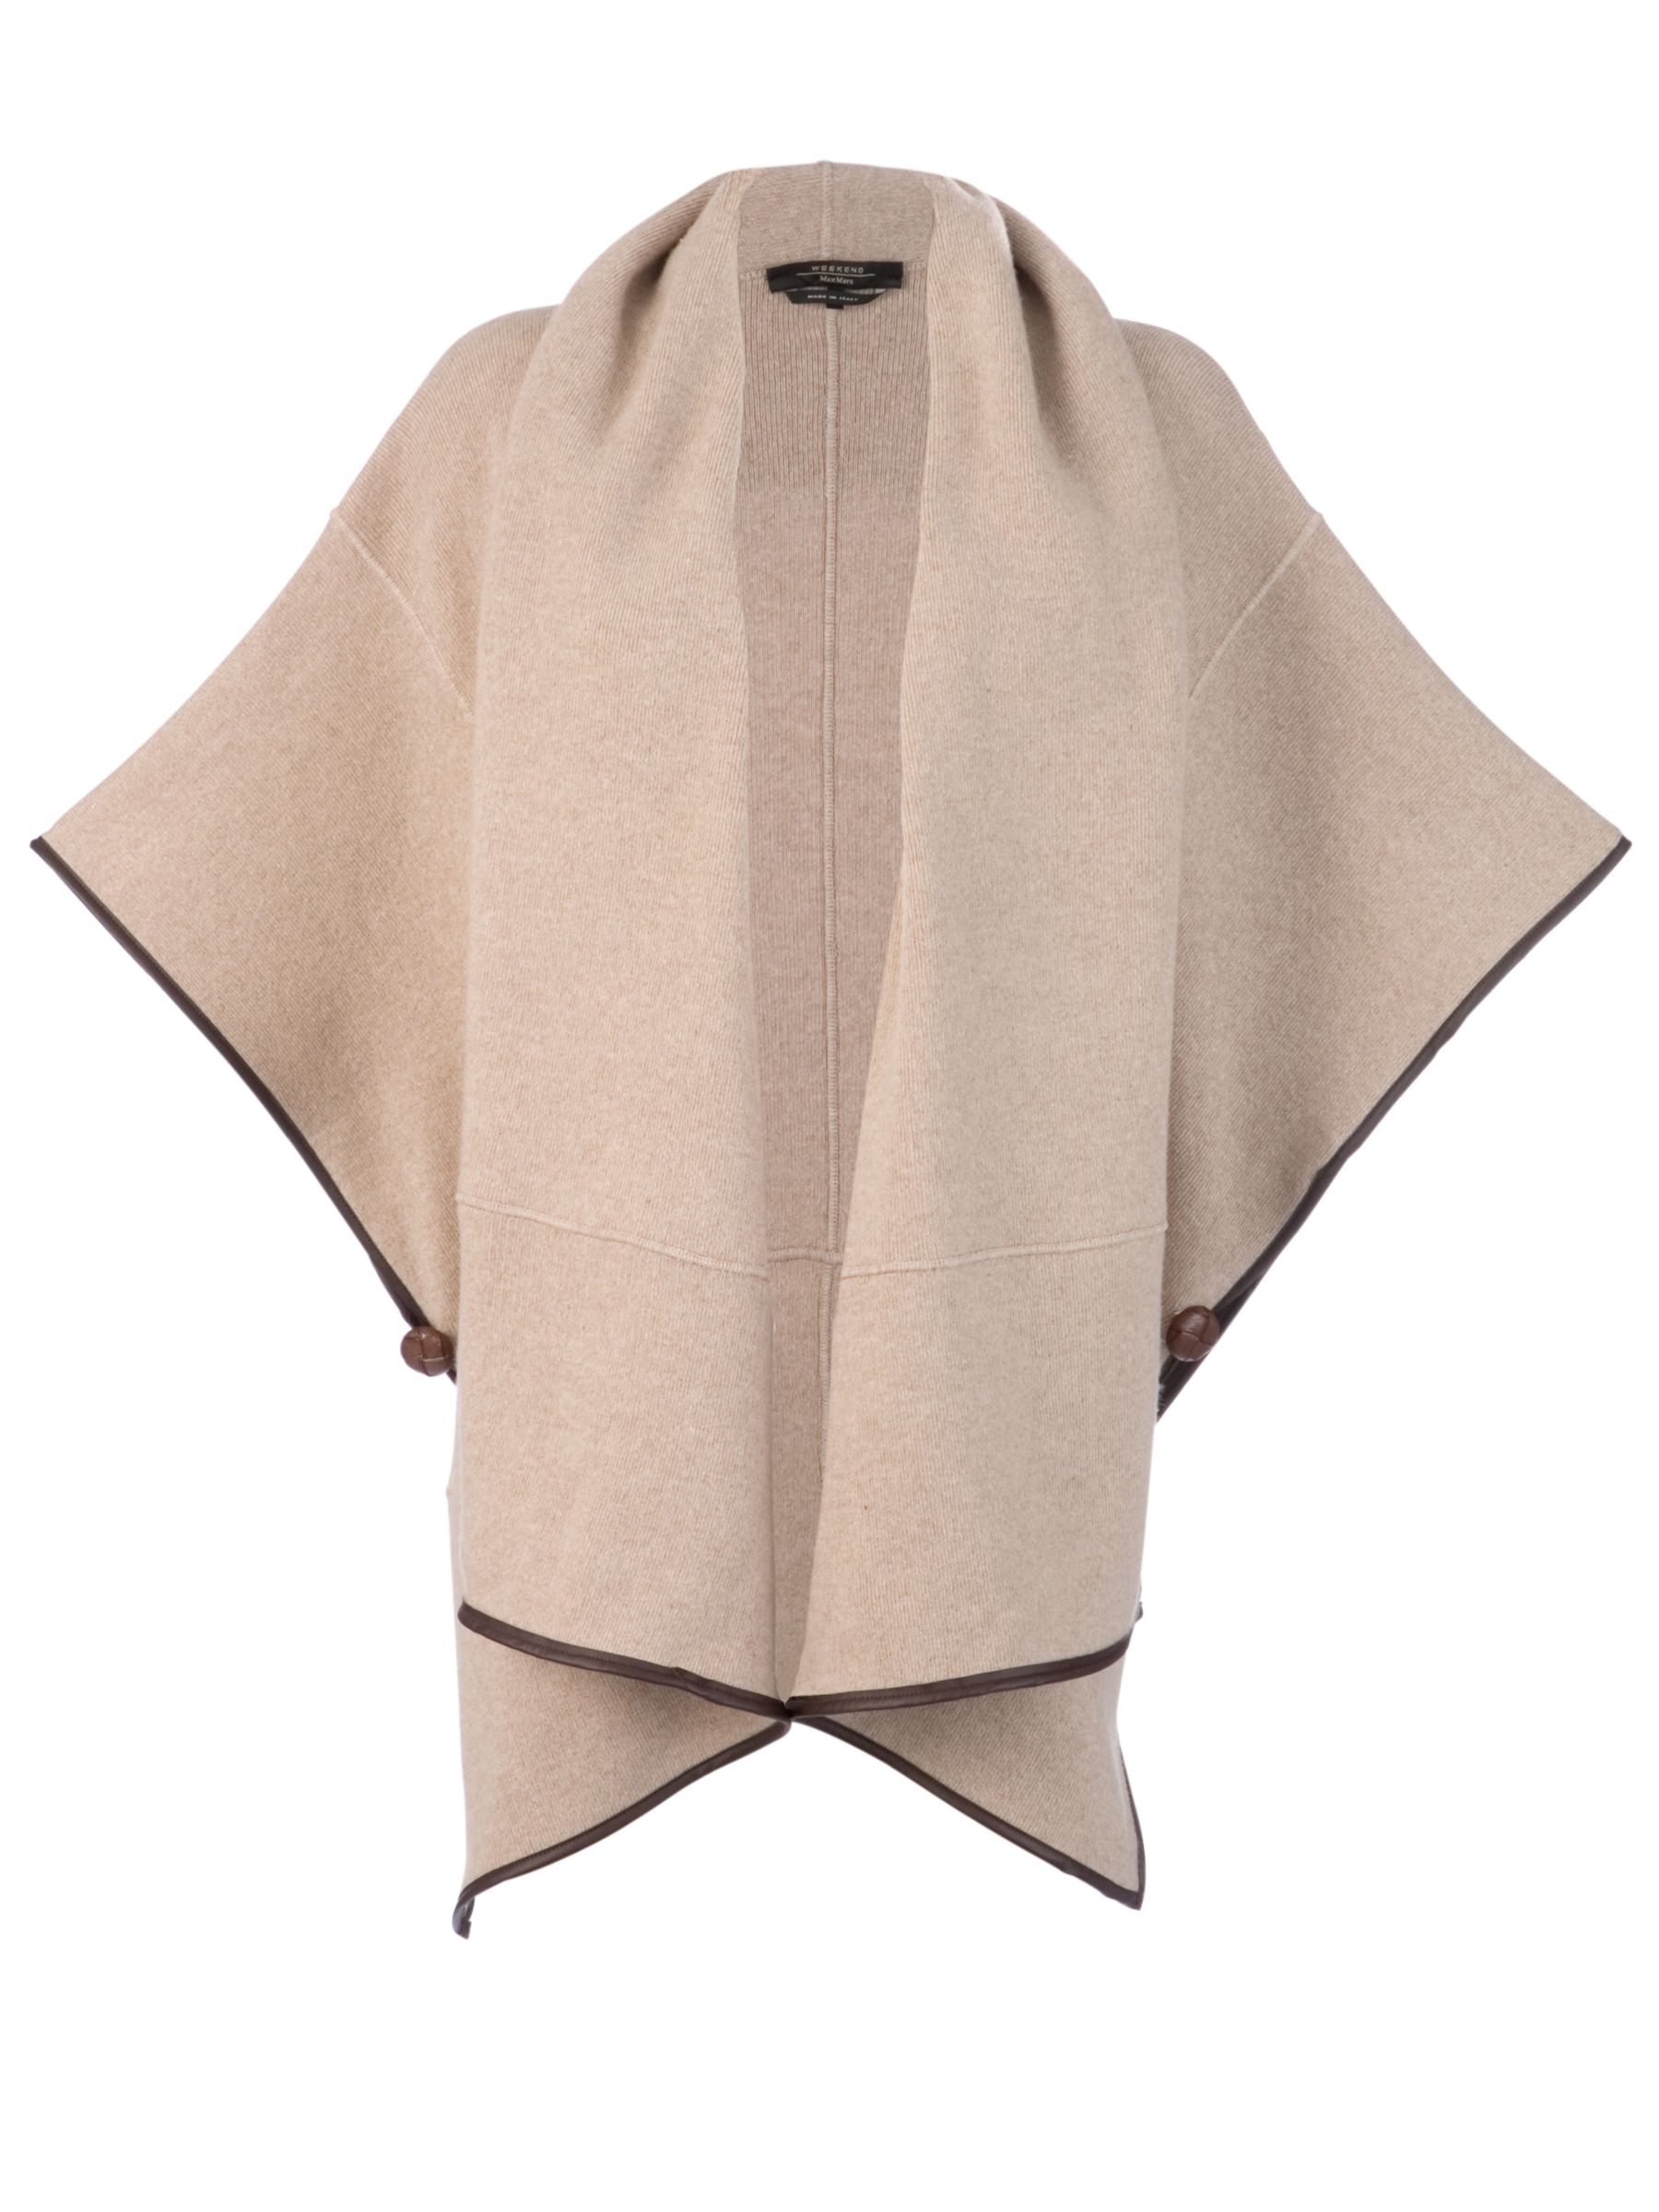 Weekend by MaxMara Knitted Cape, Beige at John Lewis